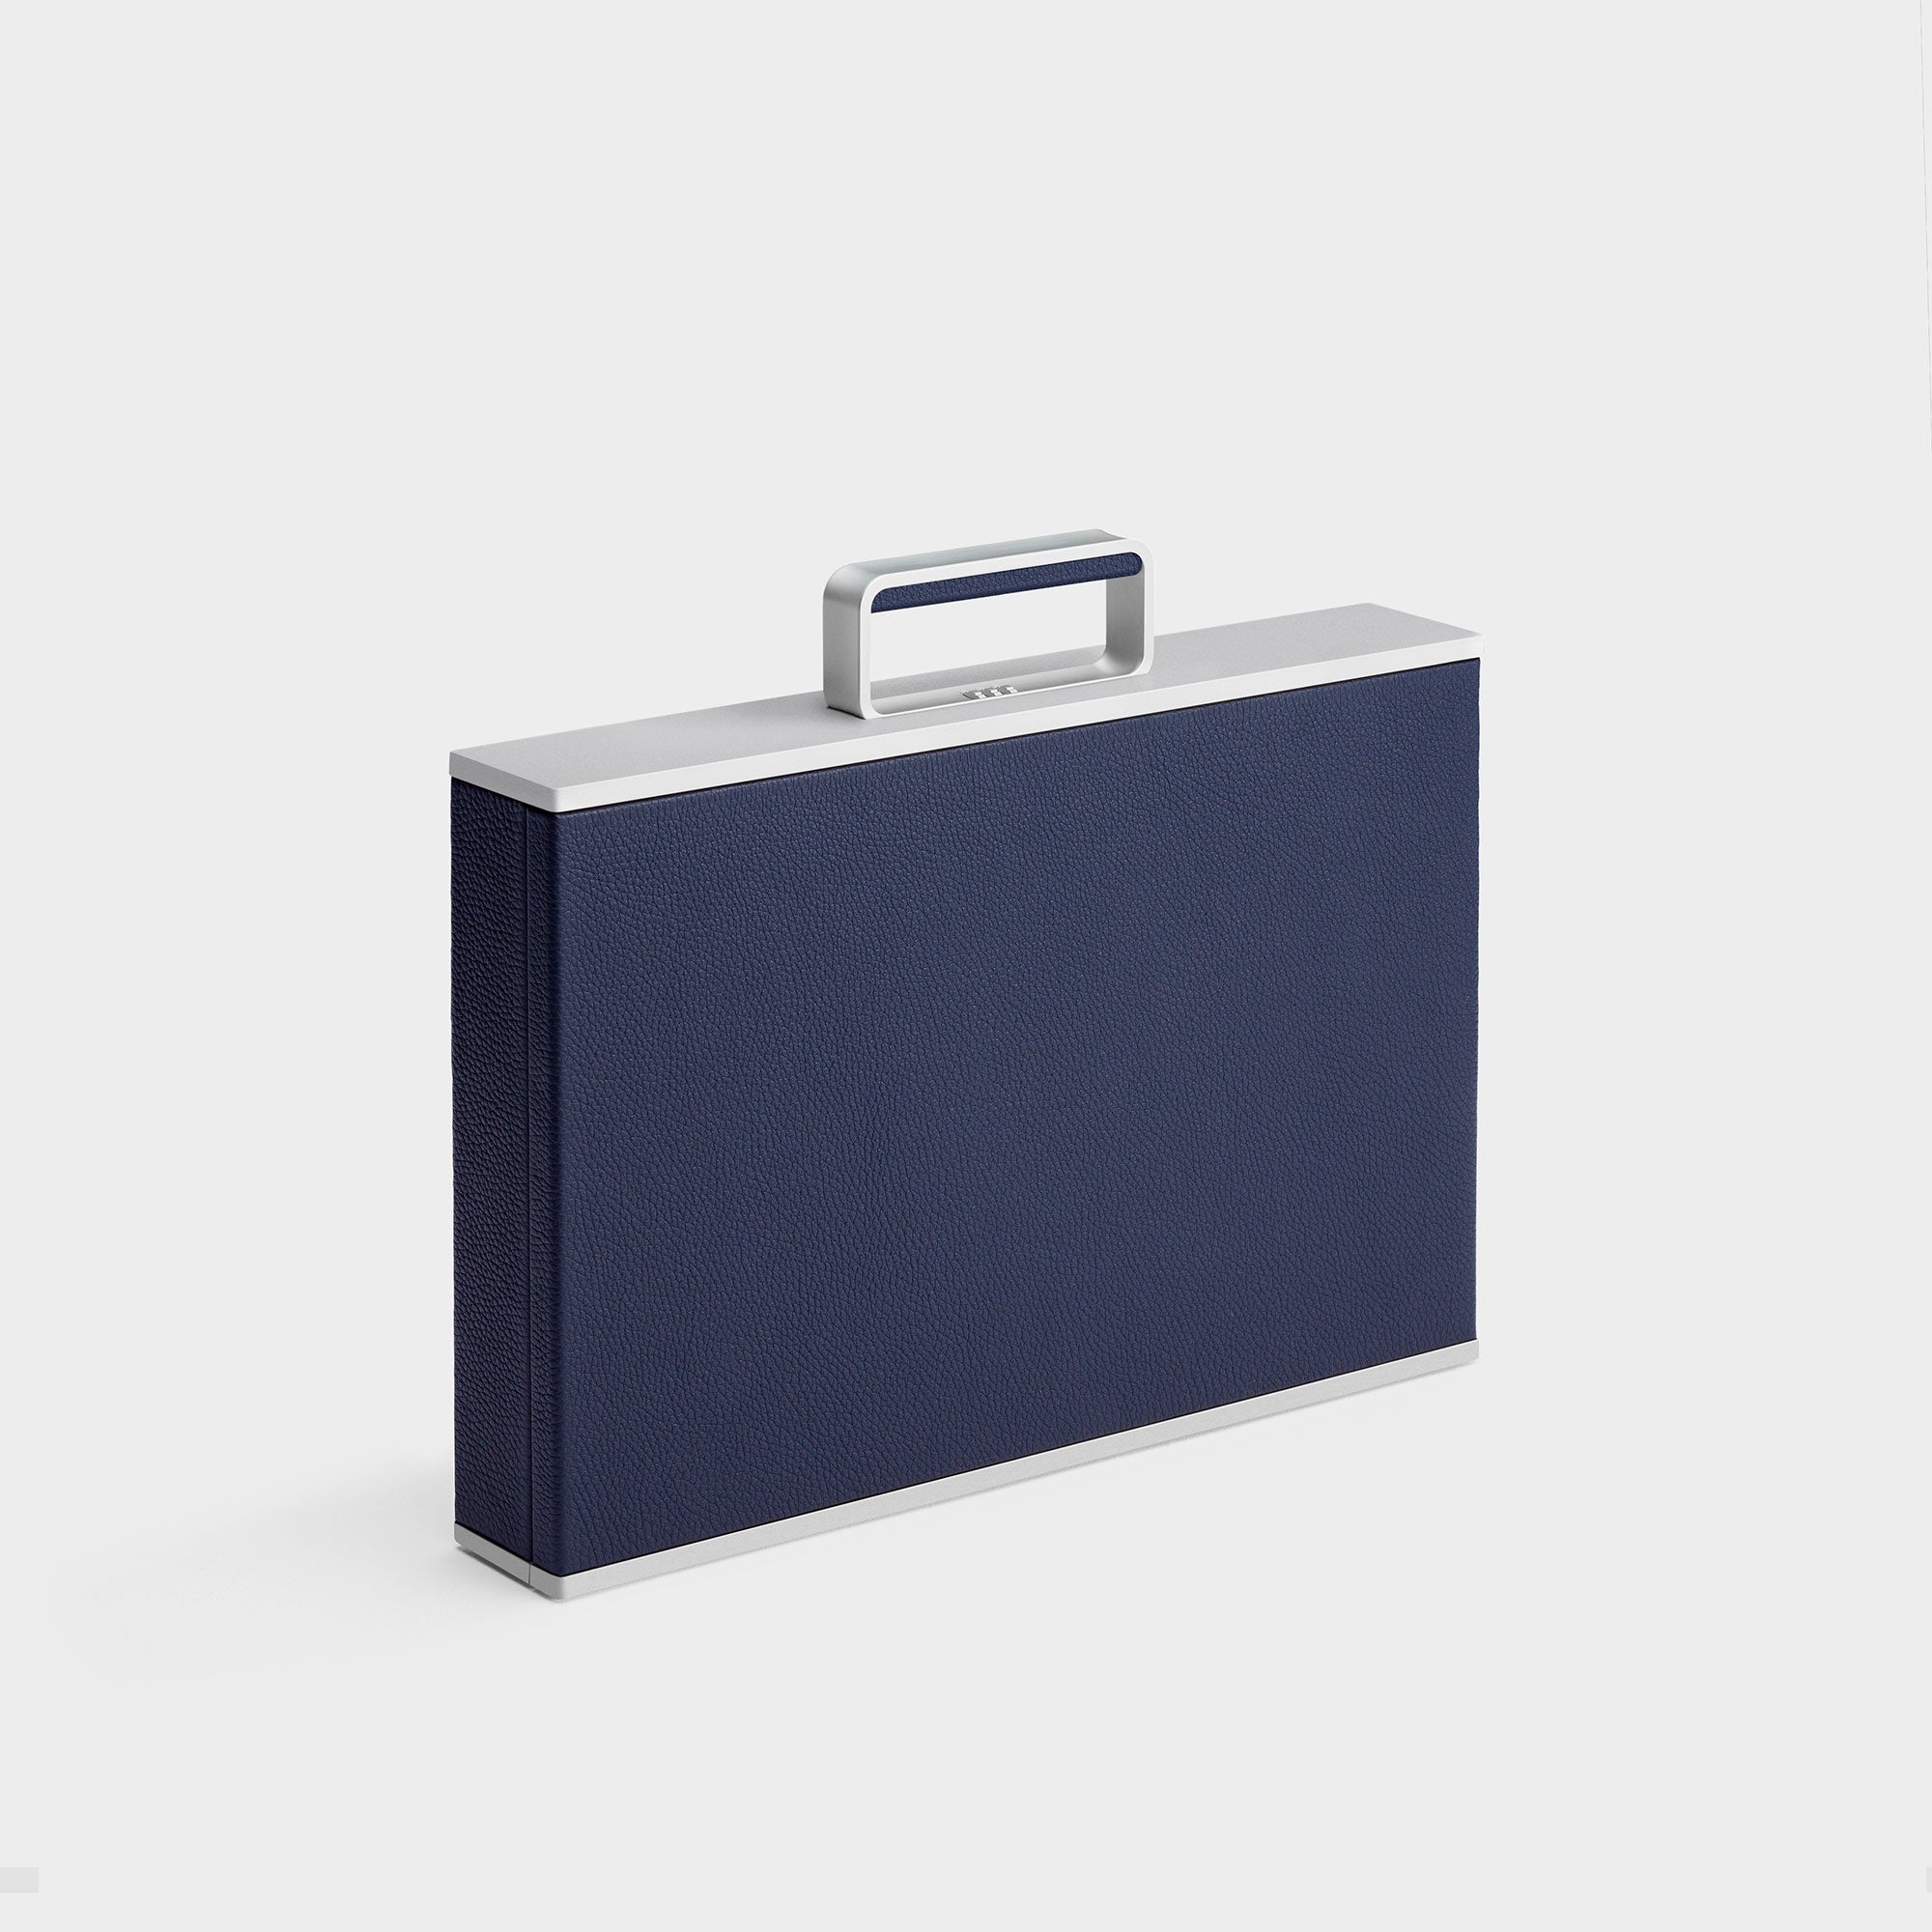 Designer watch briefcase made from sapphire French leather, carbon fiber and anodized aluminum and soft Alcantara